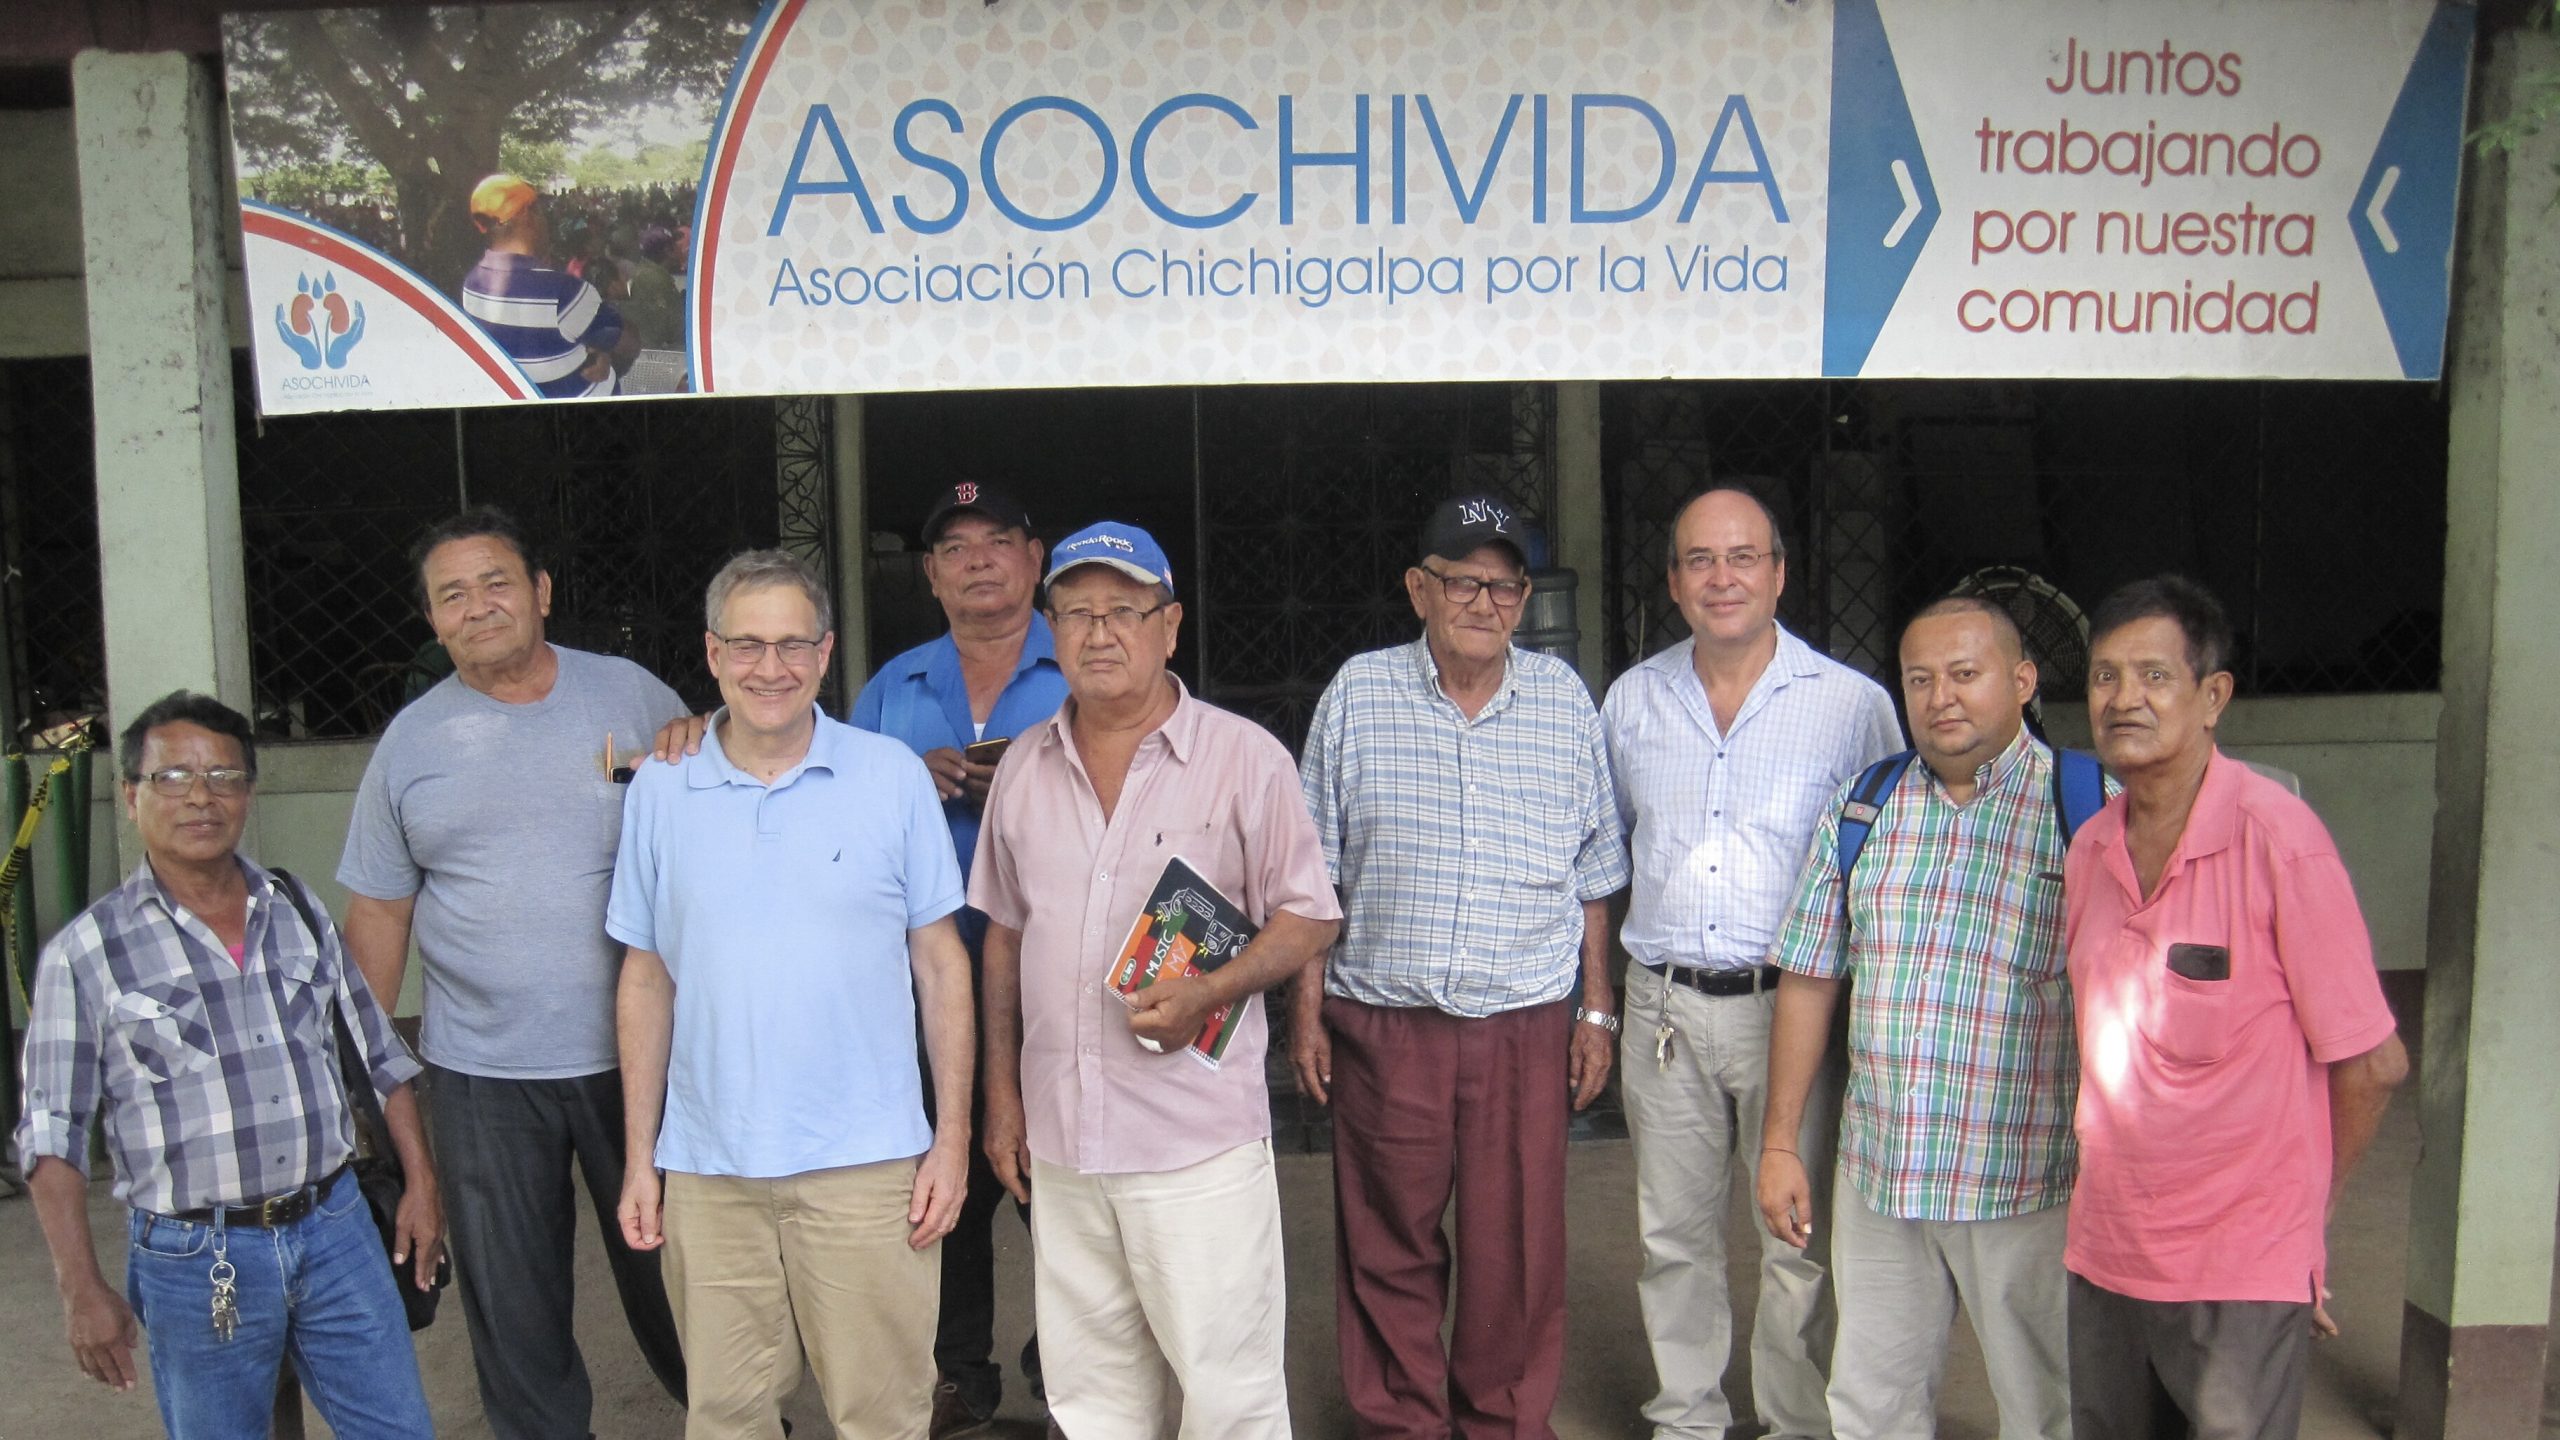 a group picture of Dr. Brooks and ASOCHIVIDA. The team is standing in front of the ASOCHIVIDA entrance.